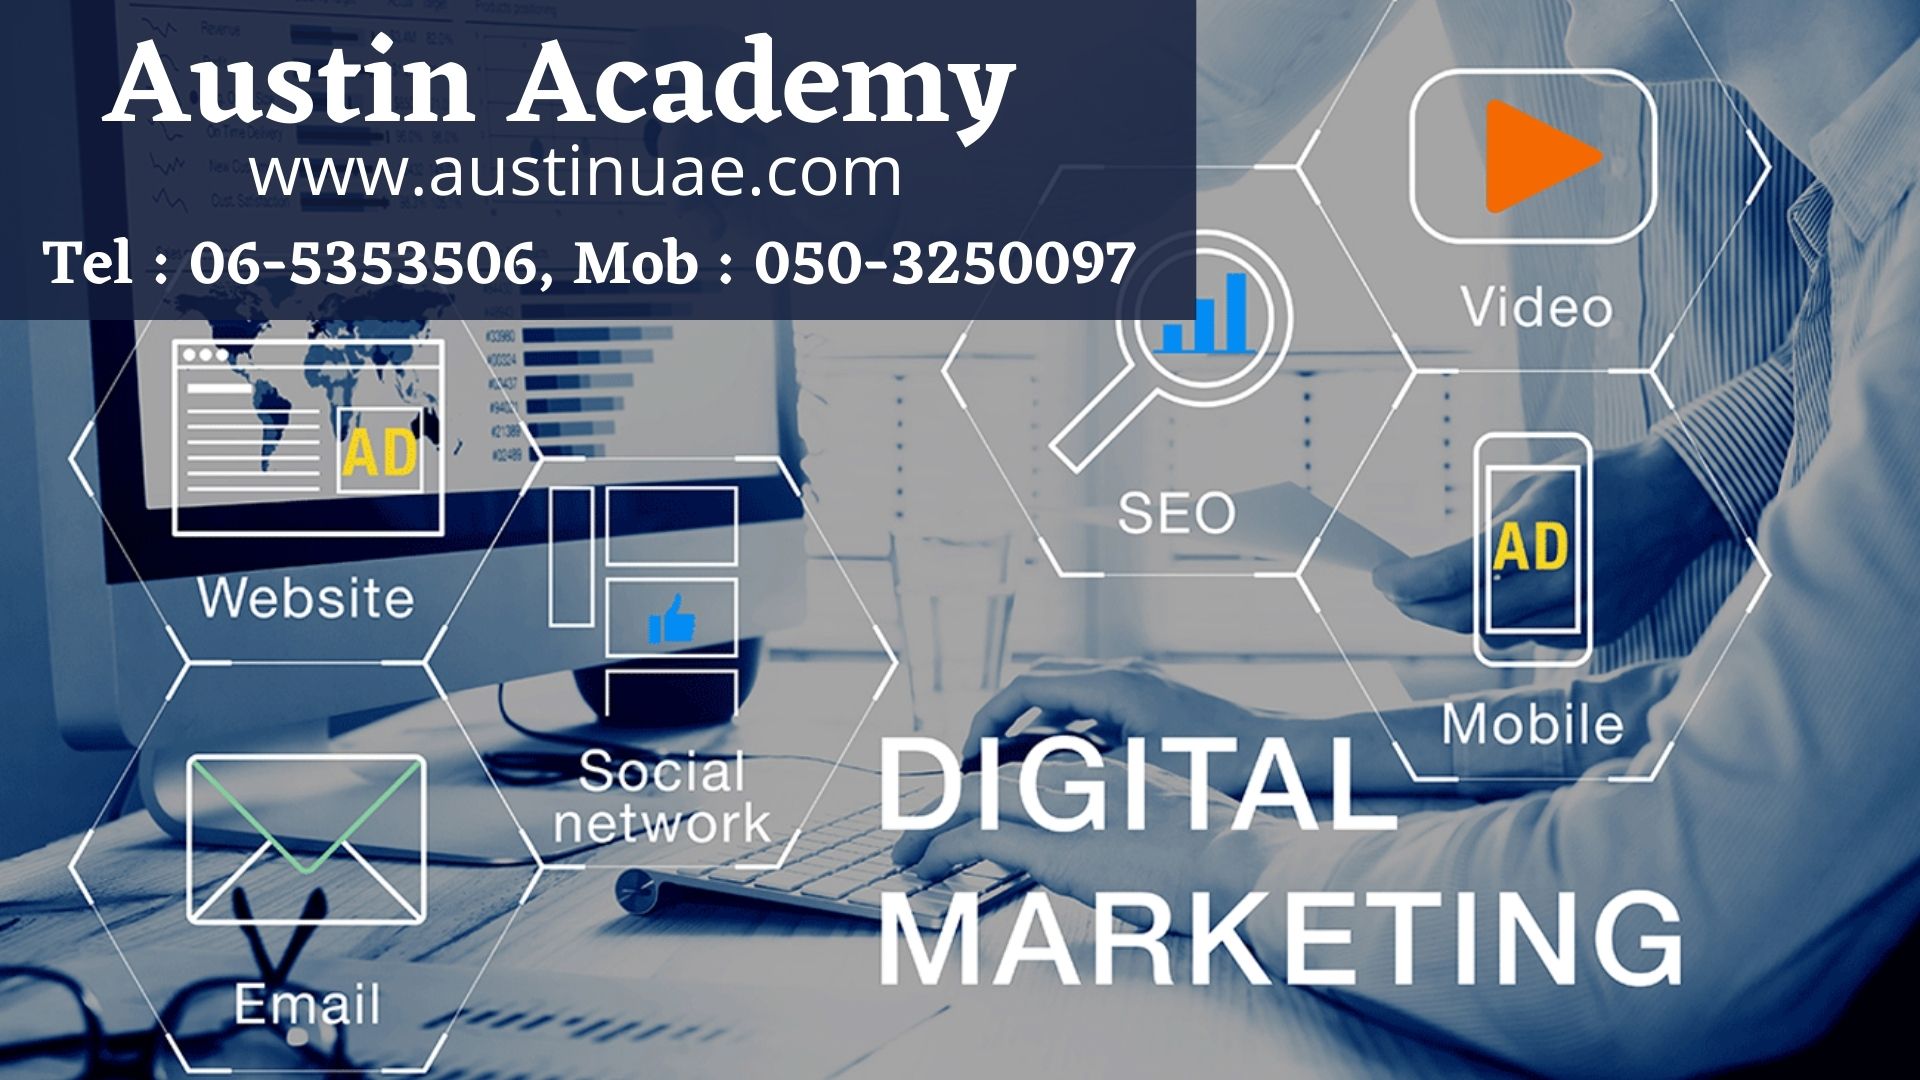 Digital Marketing Classes In Sharjah With Great Offer 0588197415